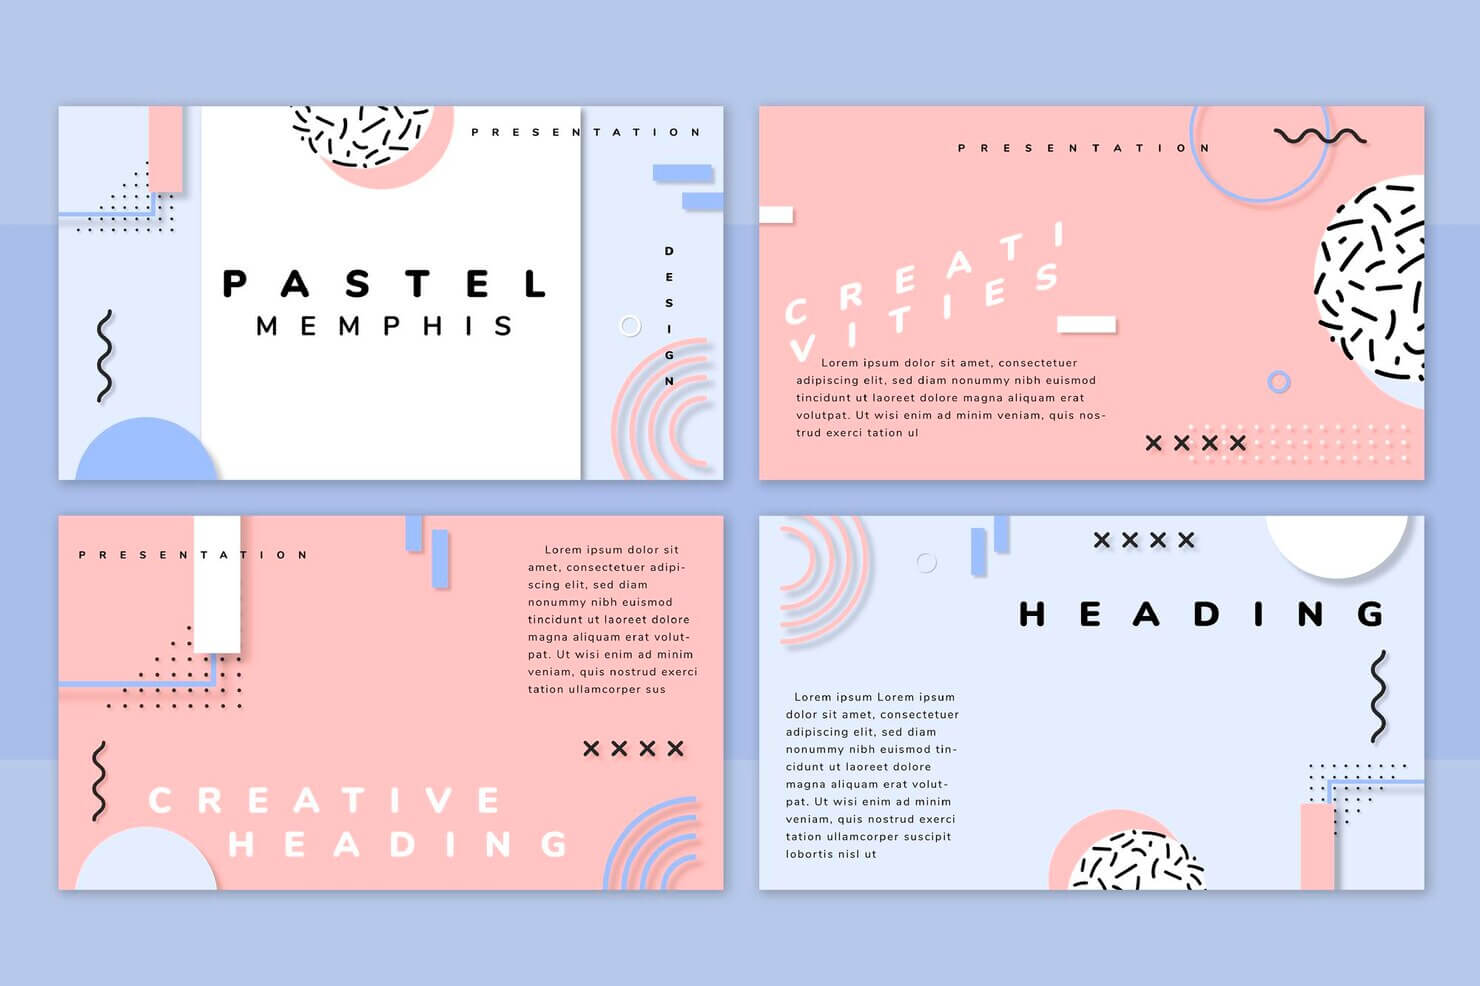 Pastel neo memphis presentation template pack for eCommerce - both for WordPress users and magento users